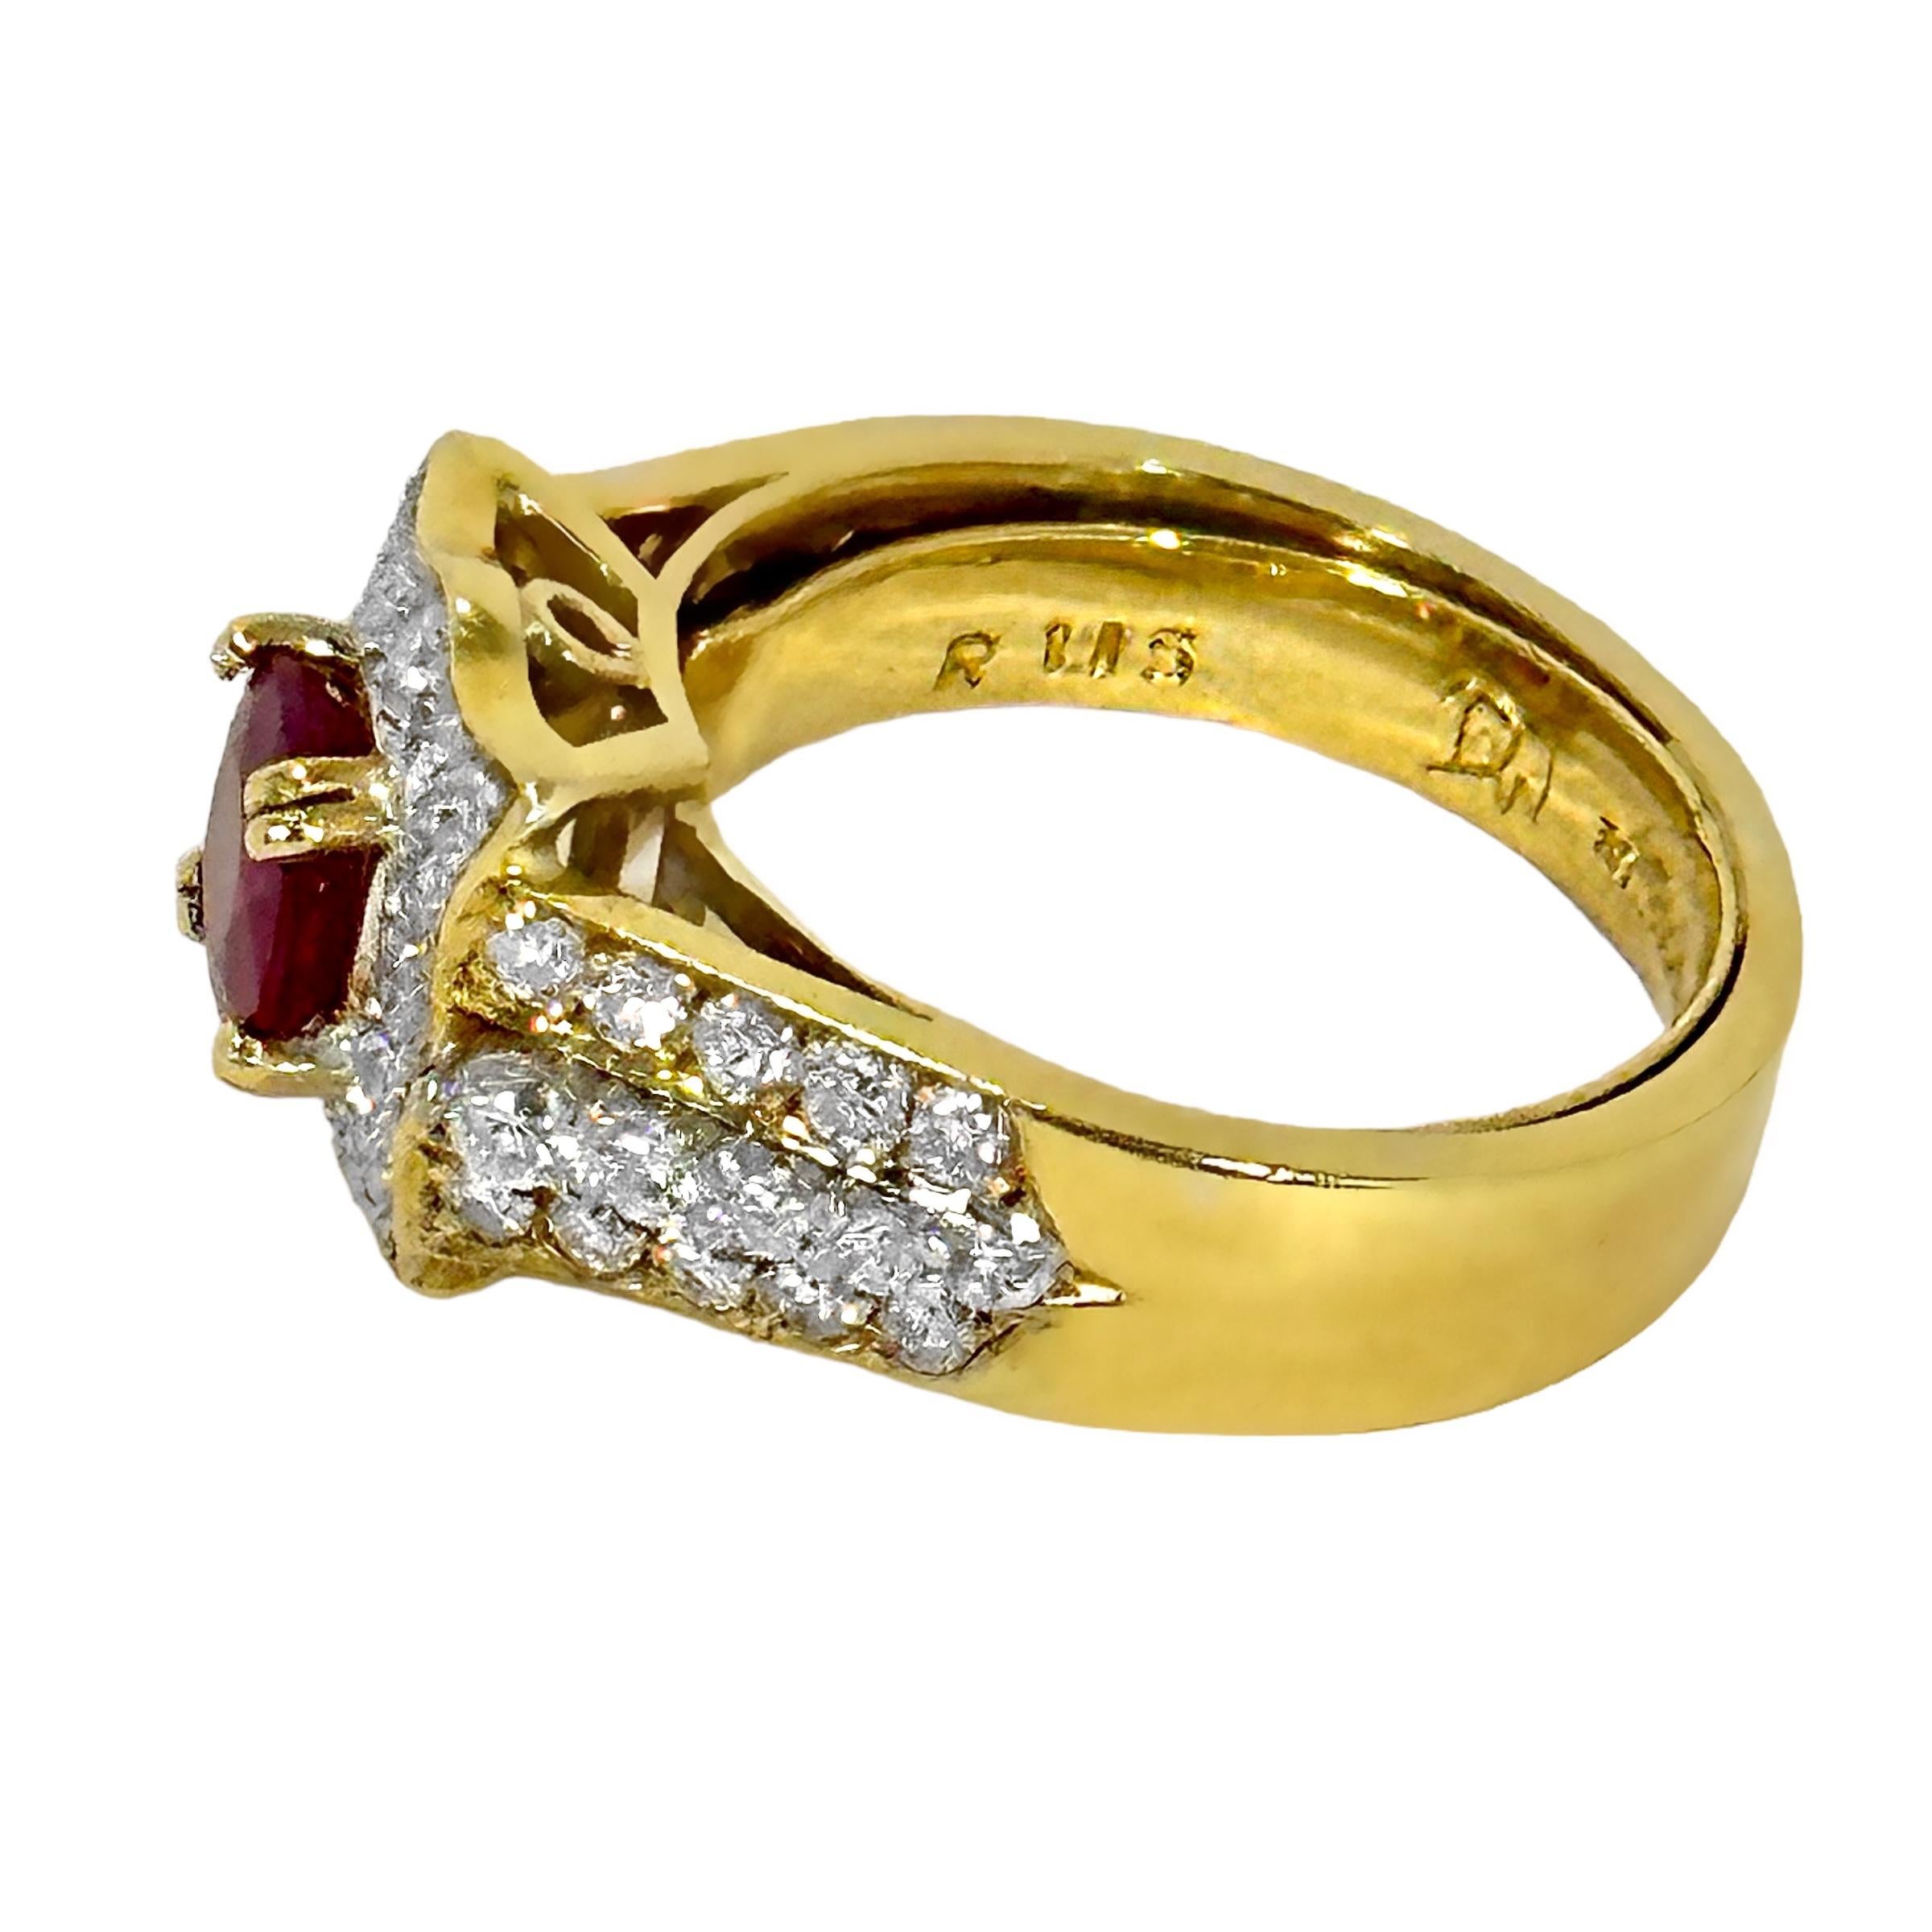 Lovely Traditional 18k Yellow Gold Ladies Cocktail Ring with Ruby and Diamonds In Good Condition For Sale In Palm Beach, FL